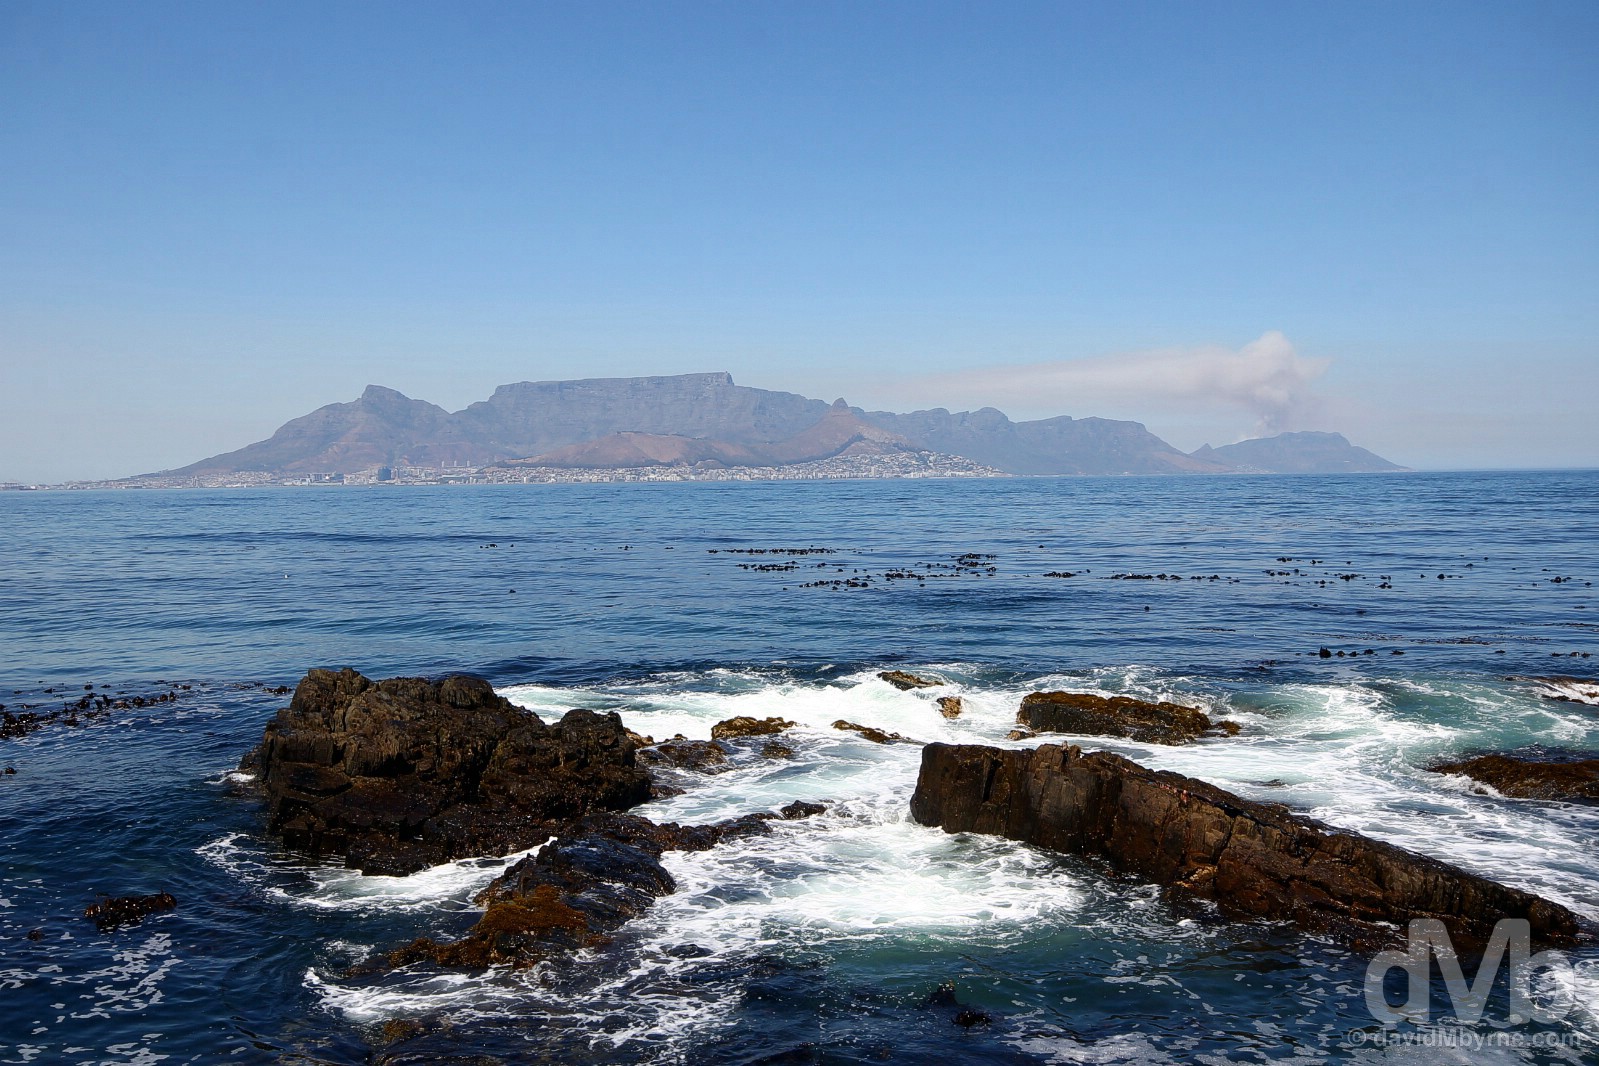 Cape Town & The Cape Peninsula as seen from the shores of Robben Island across Table Bay, Western Cape, South Africa. February 22, 2017.